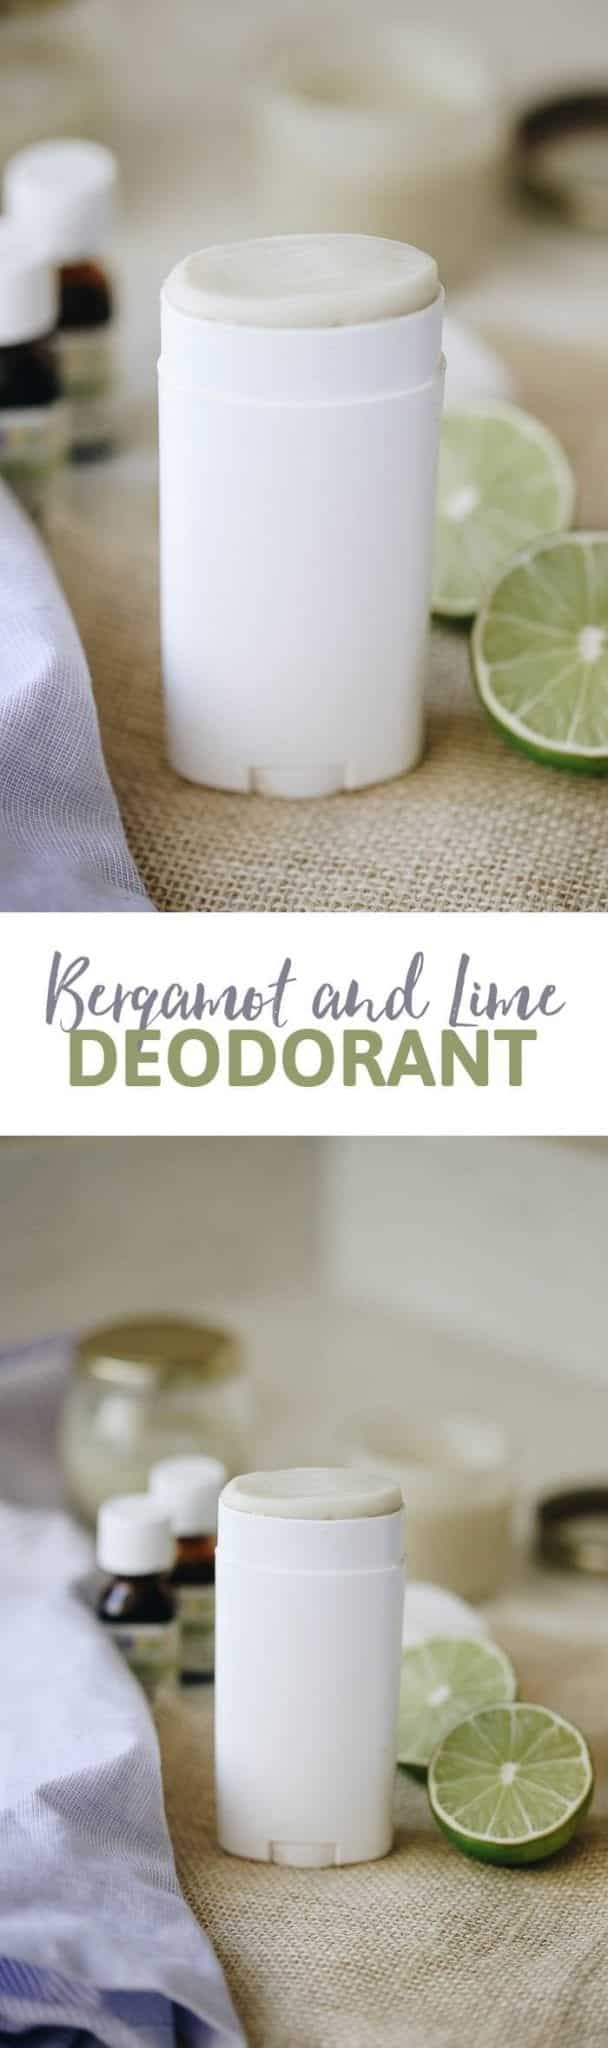 Have you always wanted to try making your own natural deodorant but have been scared to try it out? This DIY recipe for Bergamot and Lime Deodorant is made from non-toxic ingredients, smells amazing and actually works! Learn how to make it here.